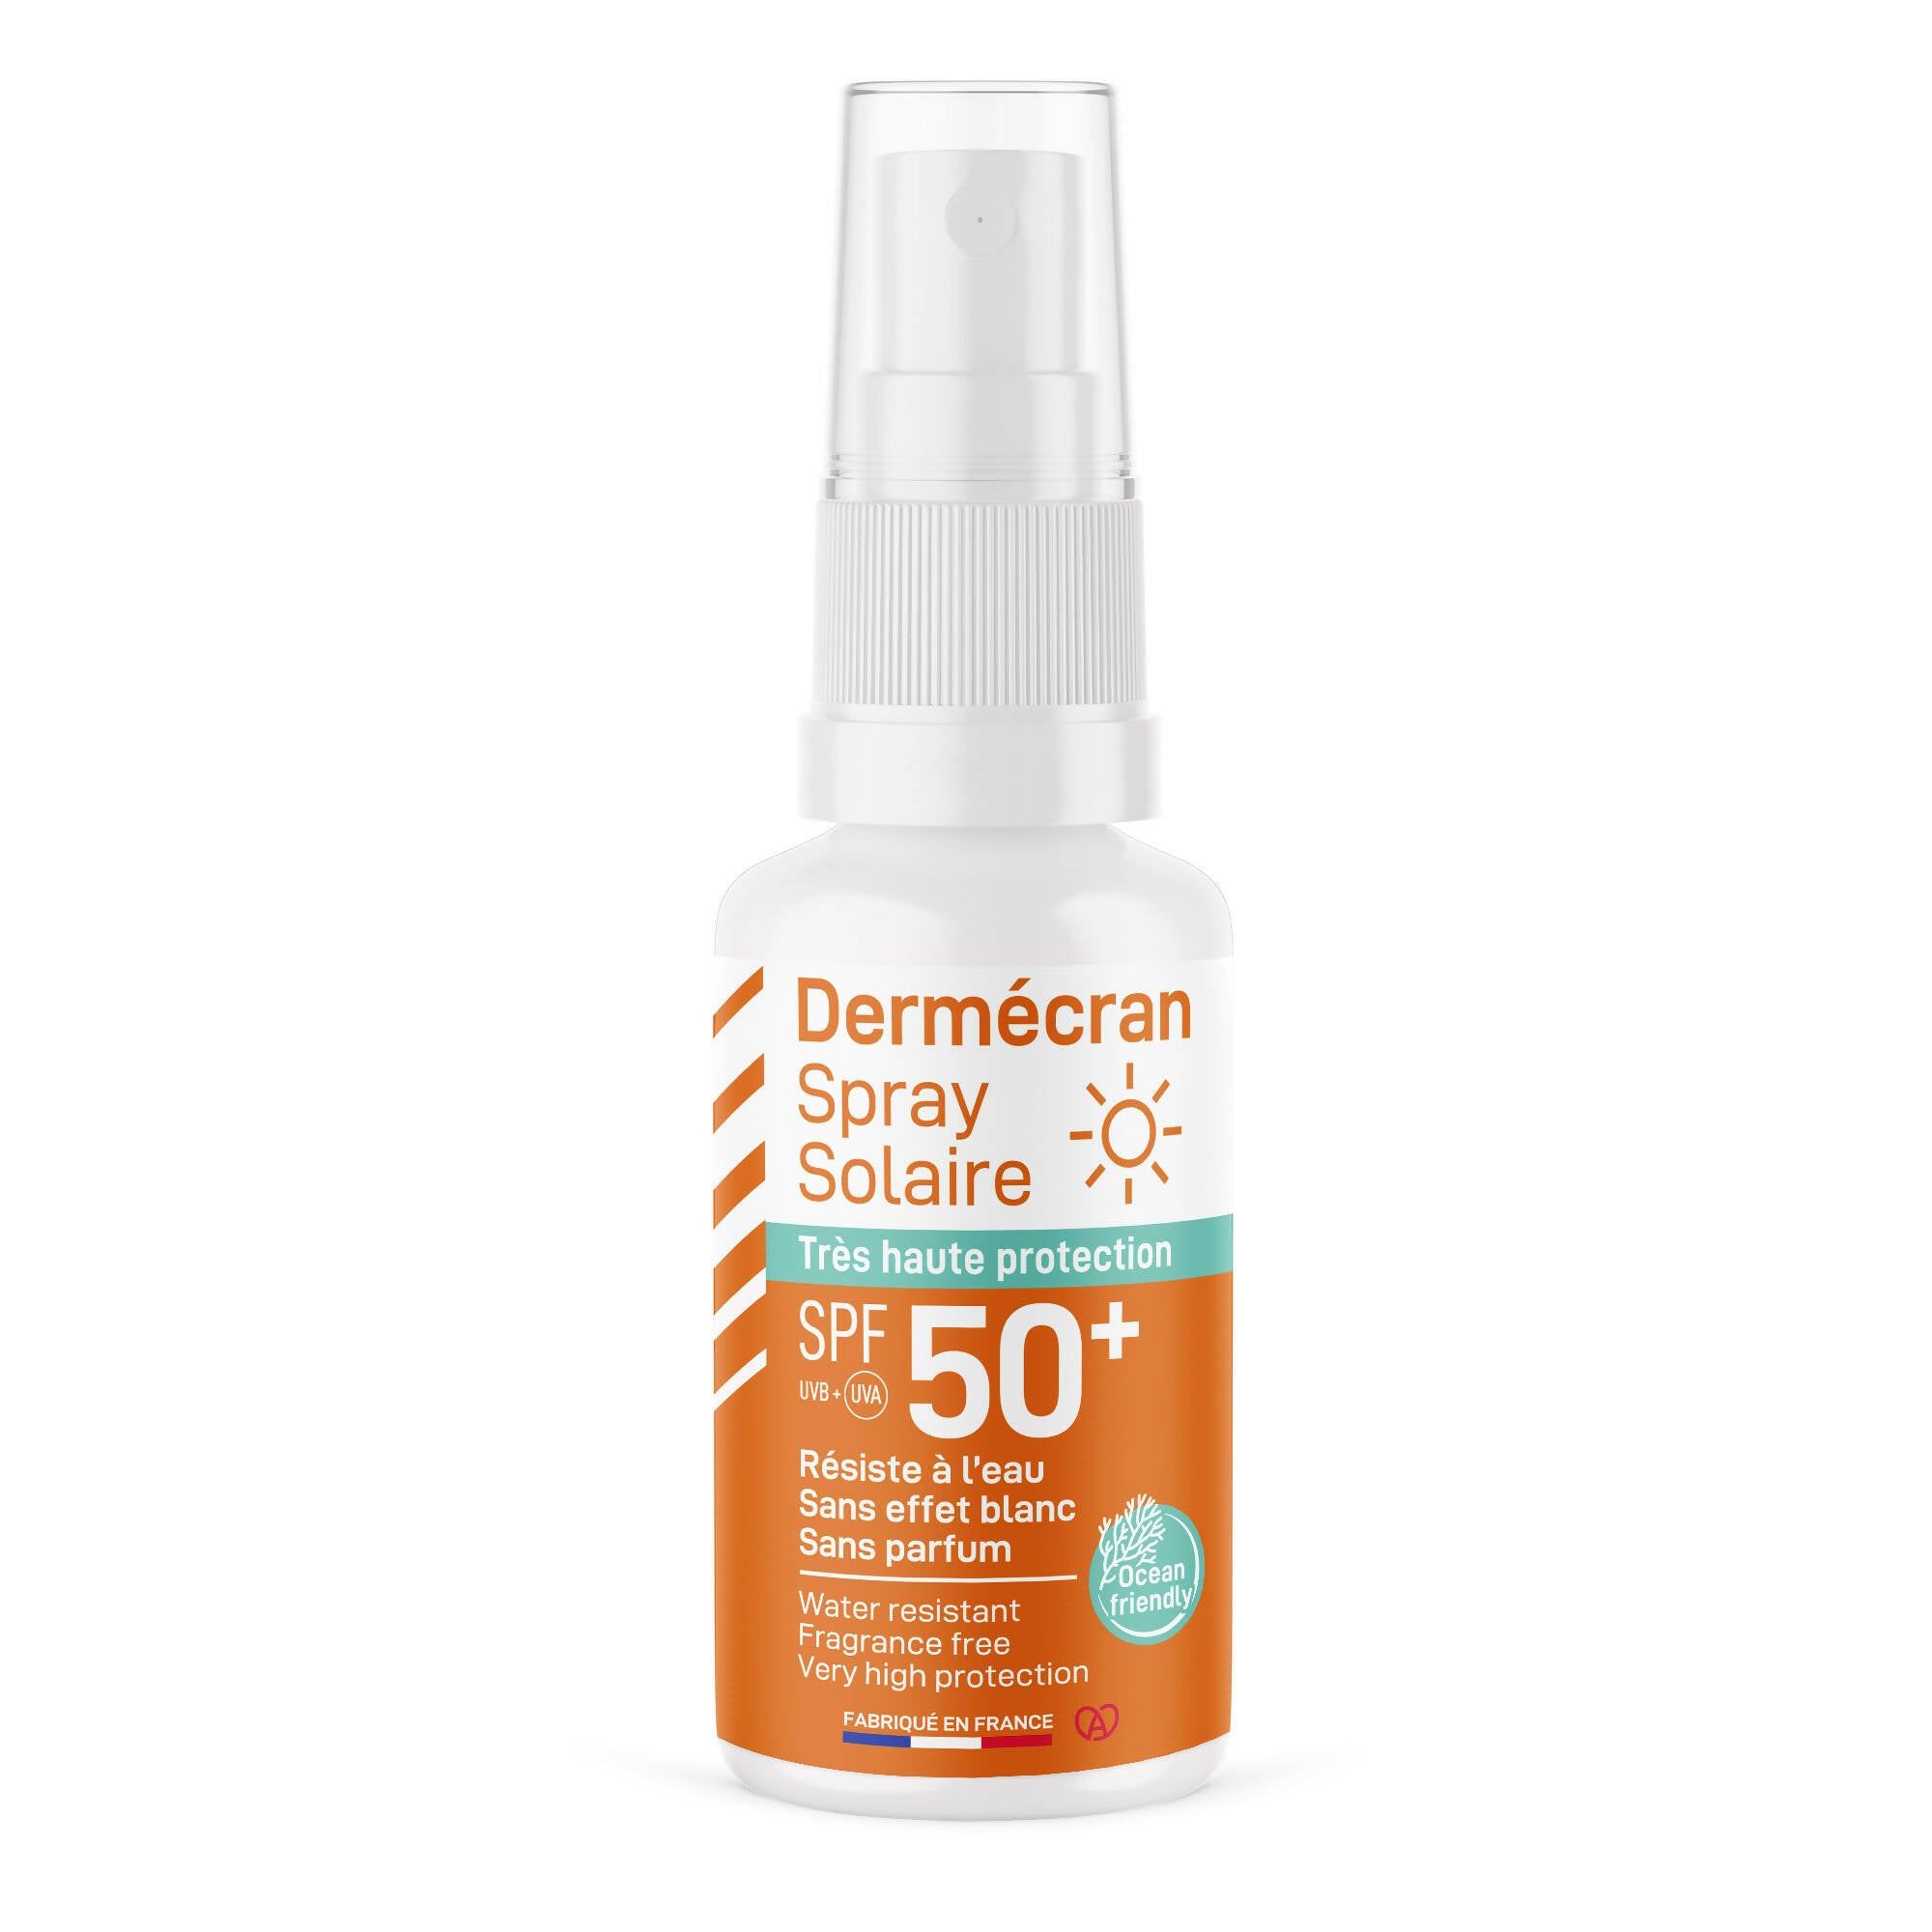 SORIFA - Complete box of 15 - Dermscreen - SPF50+ sun spray - Face and body - Ocean Friendly formula - Water resistant - For the whole family from 3 years old - Made in France - 50 ml spray - 0